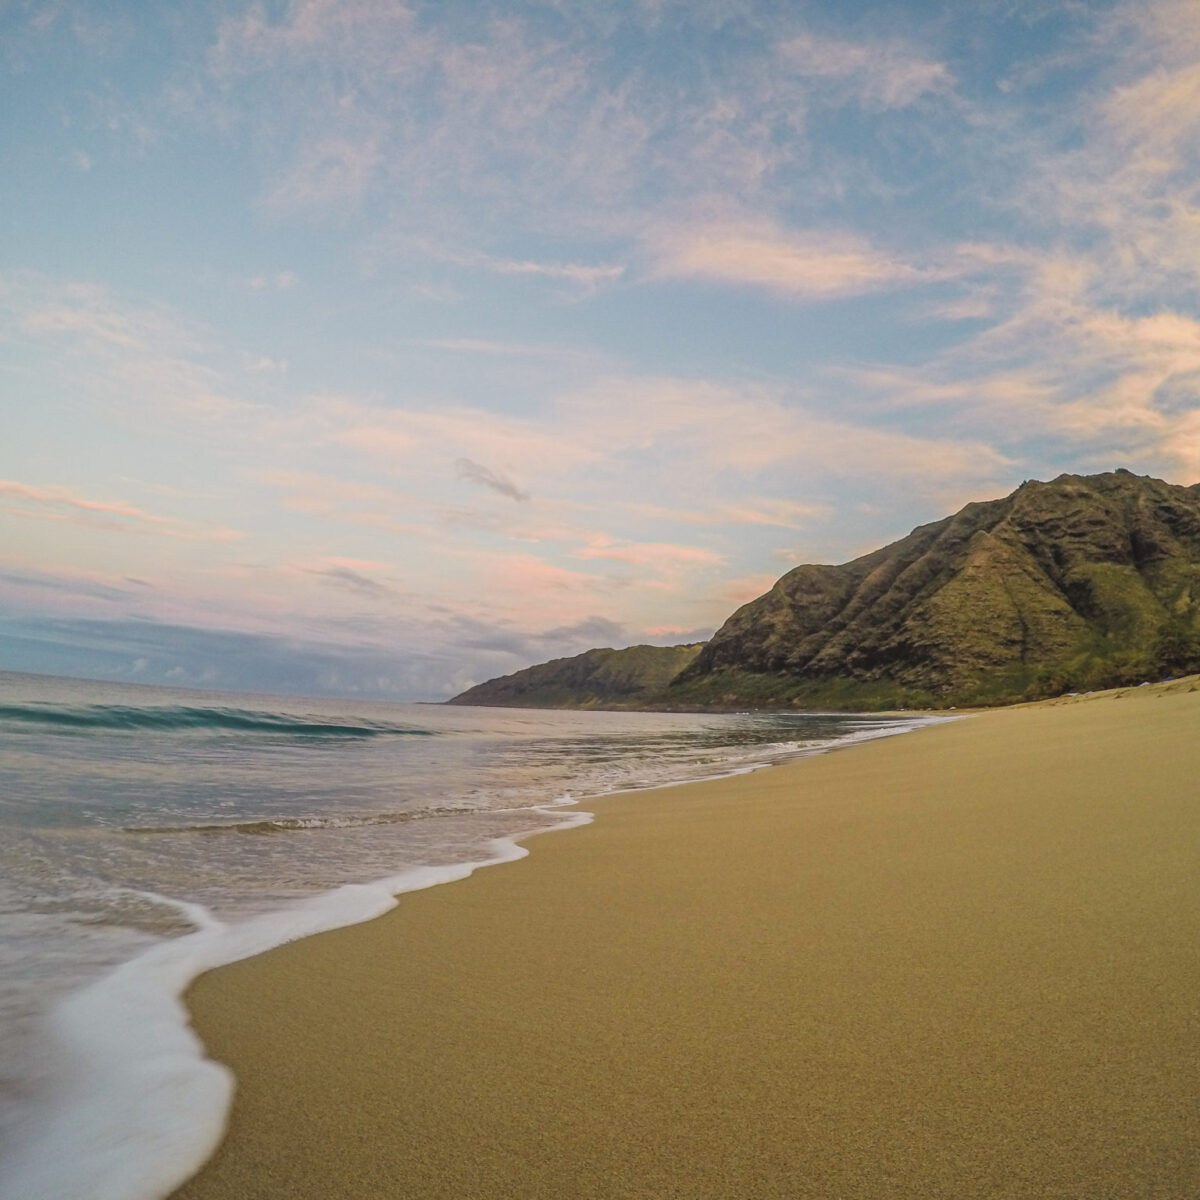 Best Beaches On Oahu - Here's The 10 Beaches You Don't Want To Miss